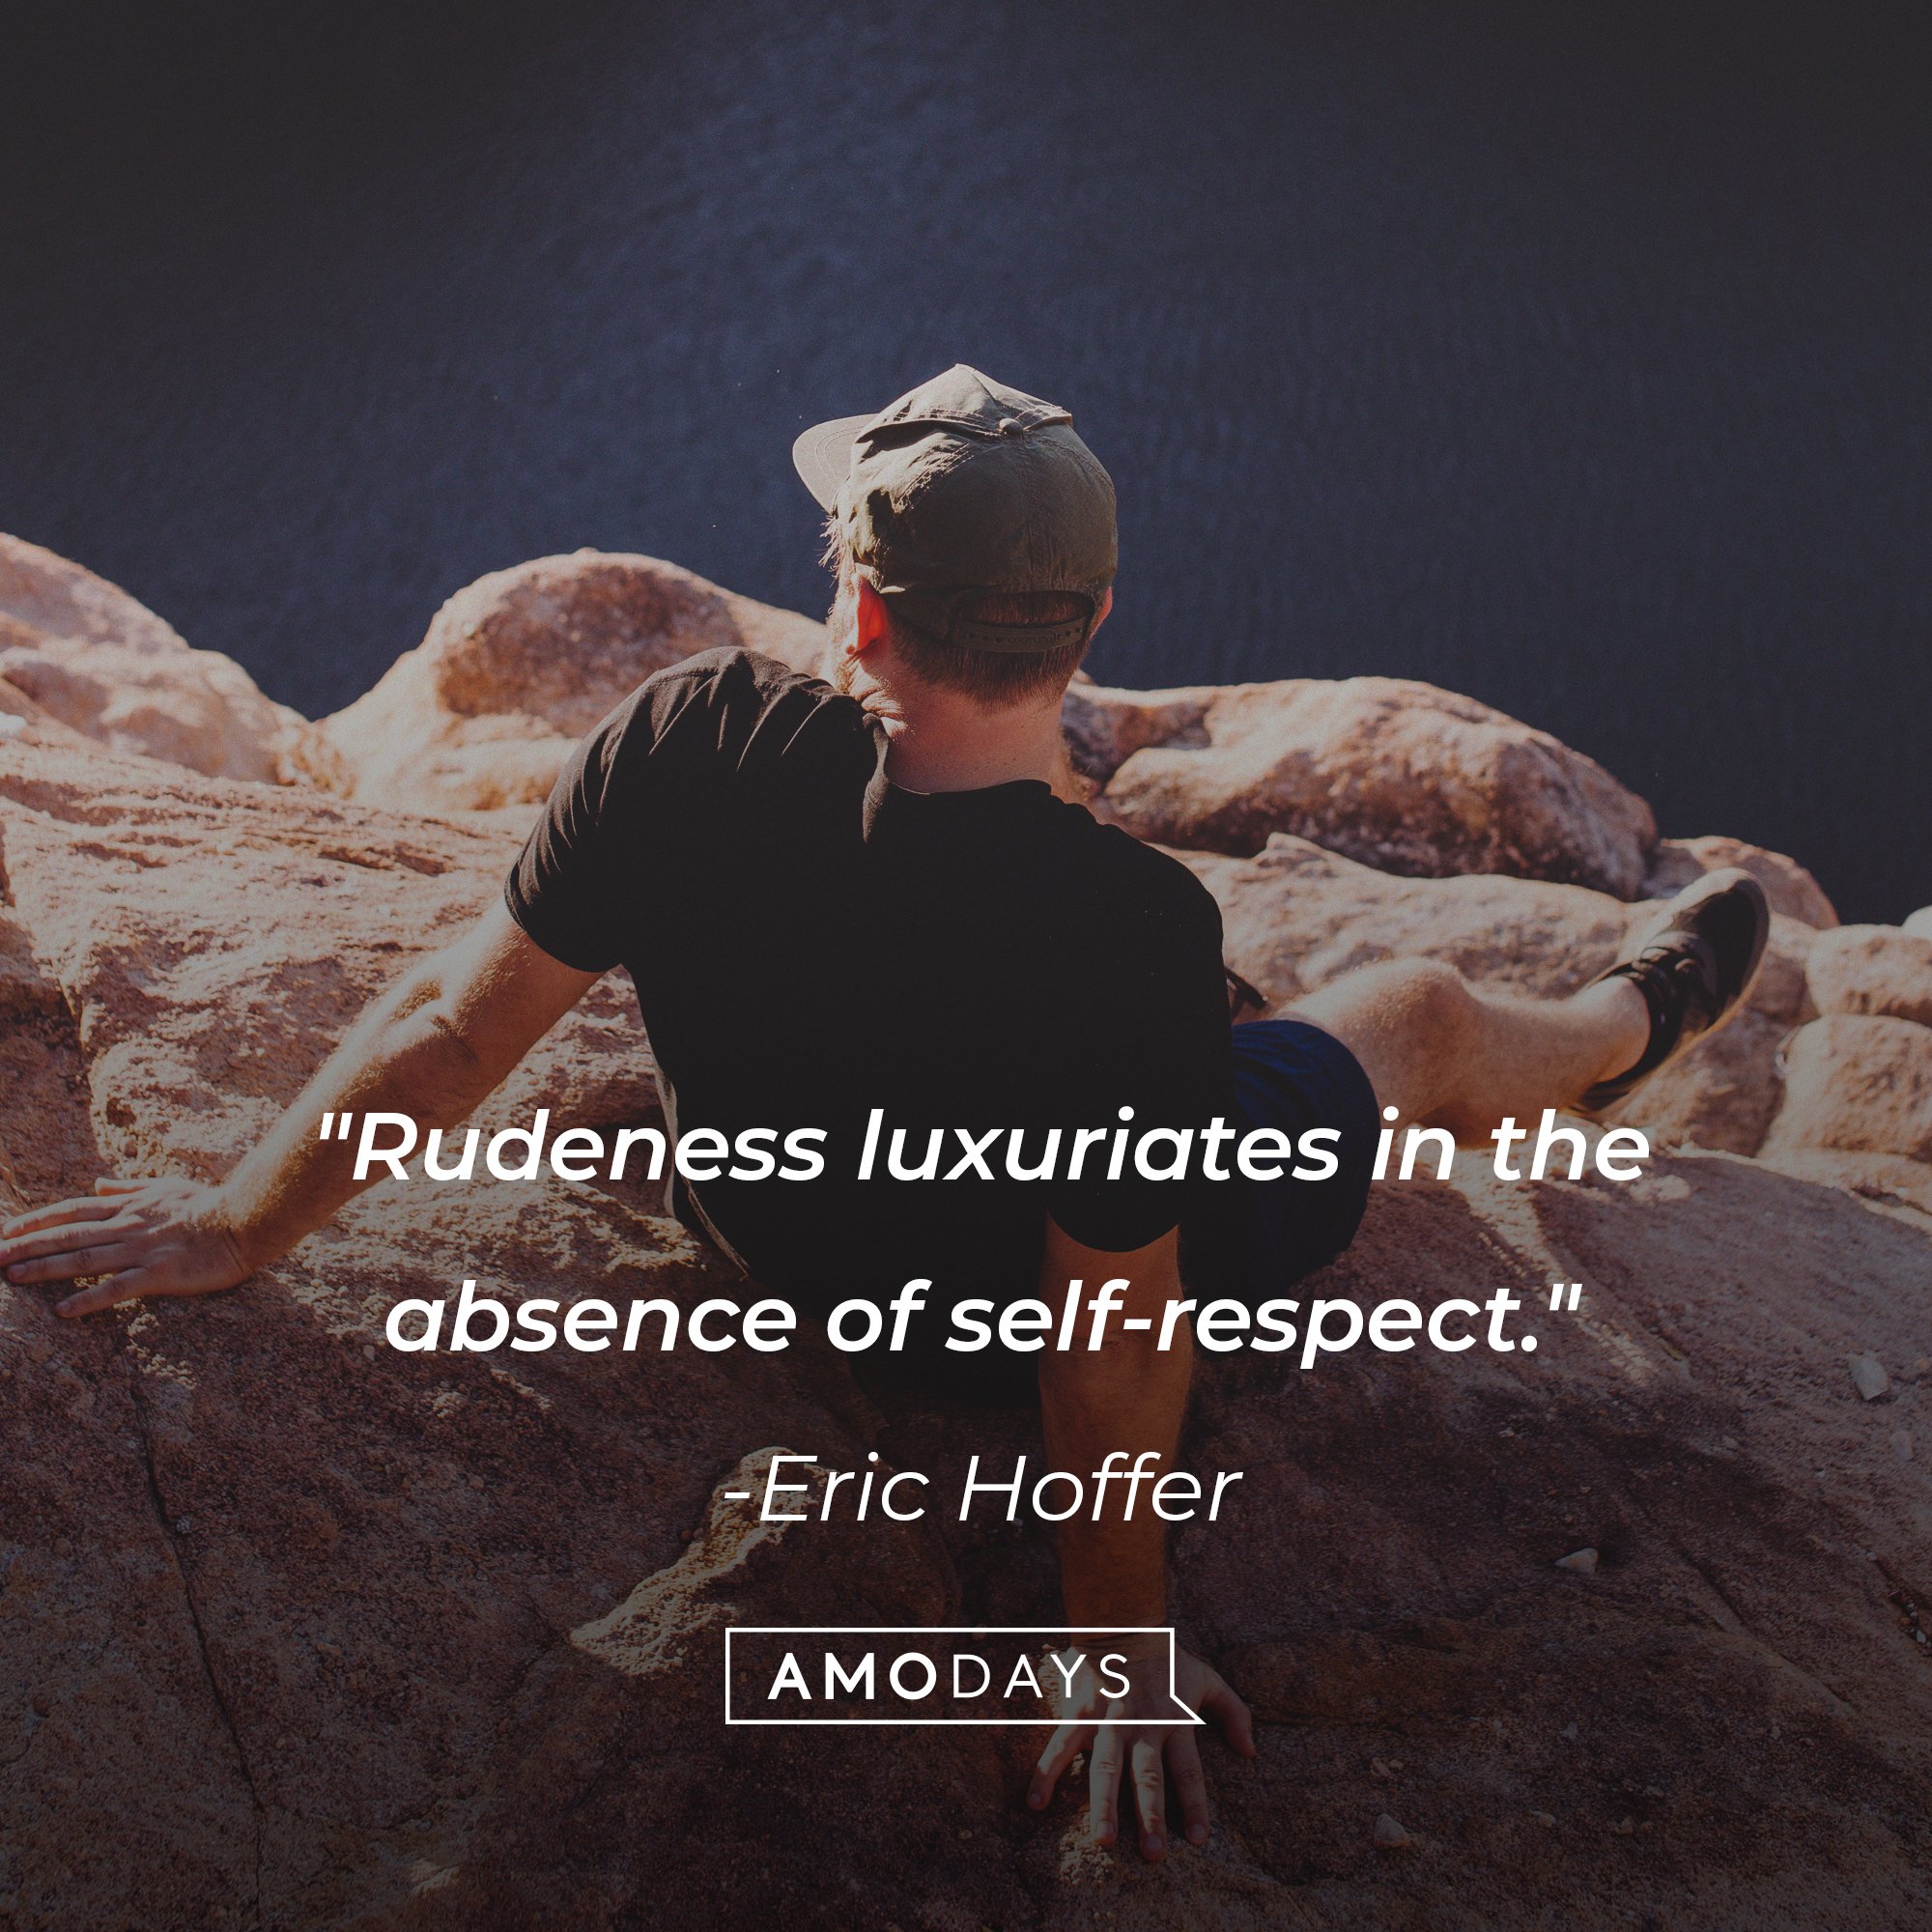 Eric Hoffer’s quote: "Rudeness luxuriates in the absence of self-respect." | Image: AmoDays